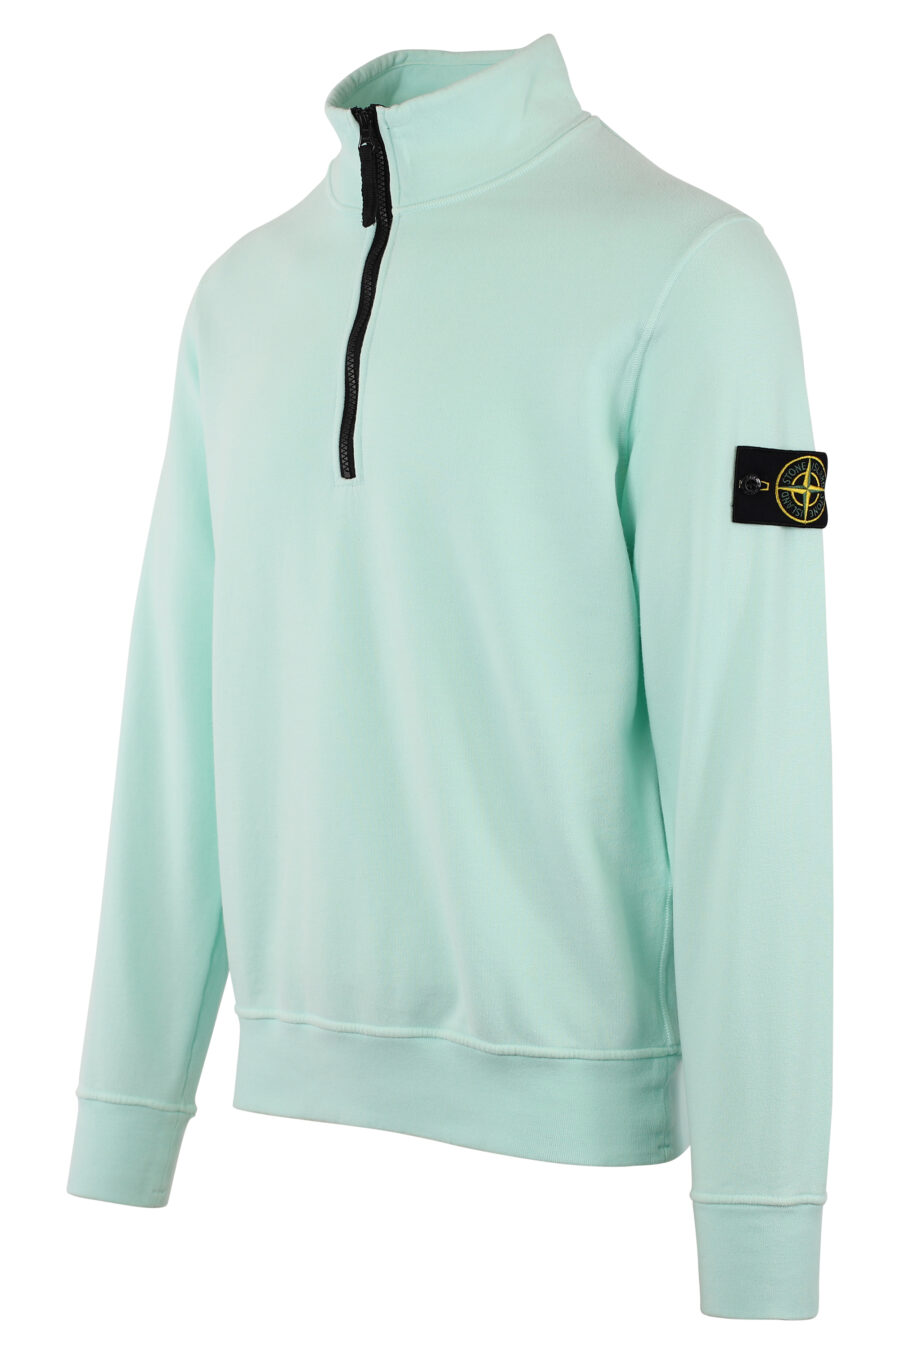 Light blue sweatshirt with short zip and patch - IMG 1475